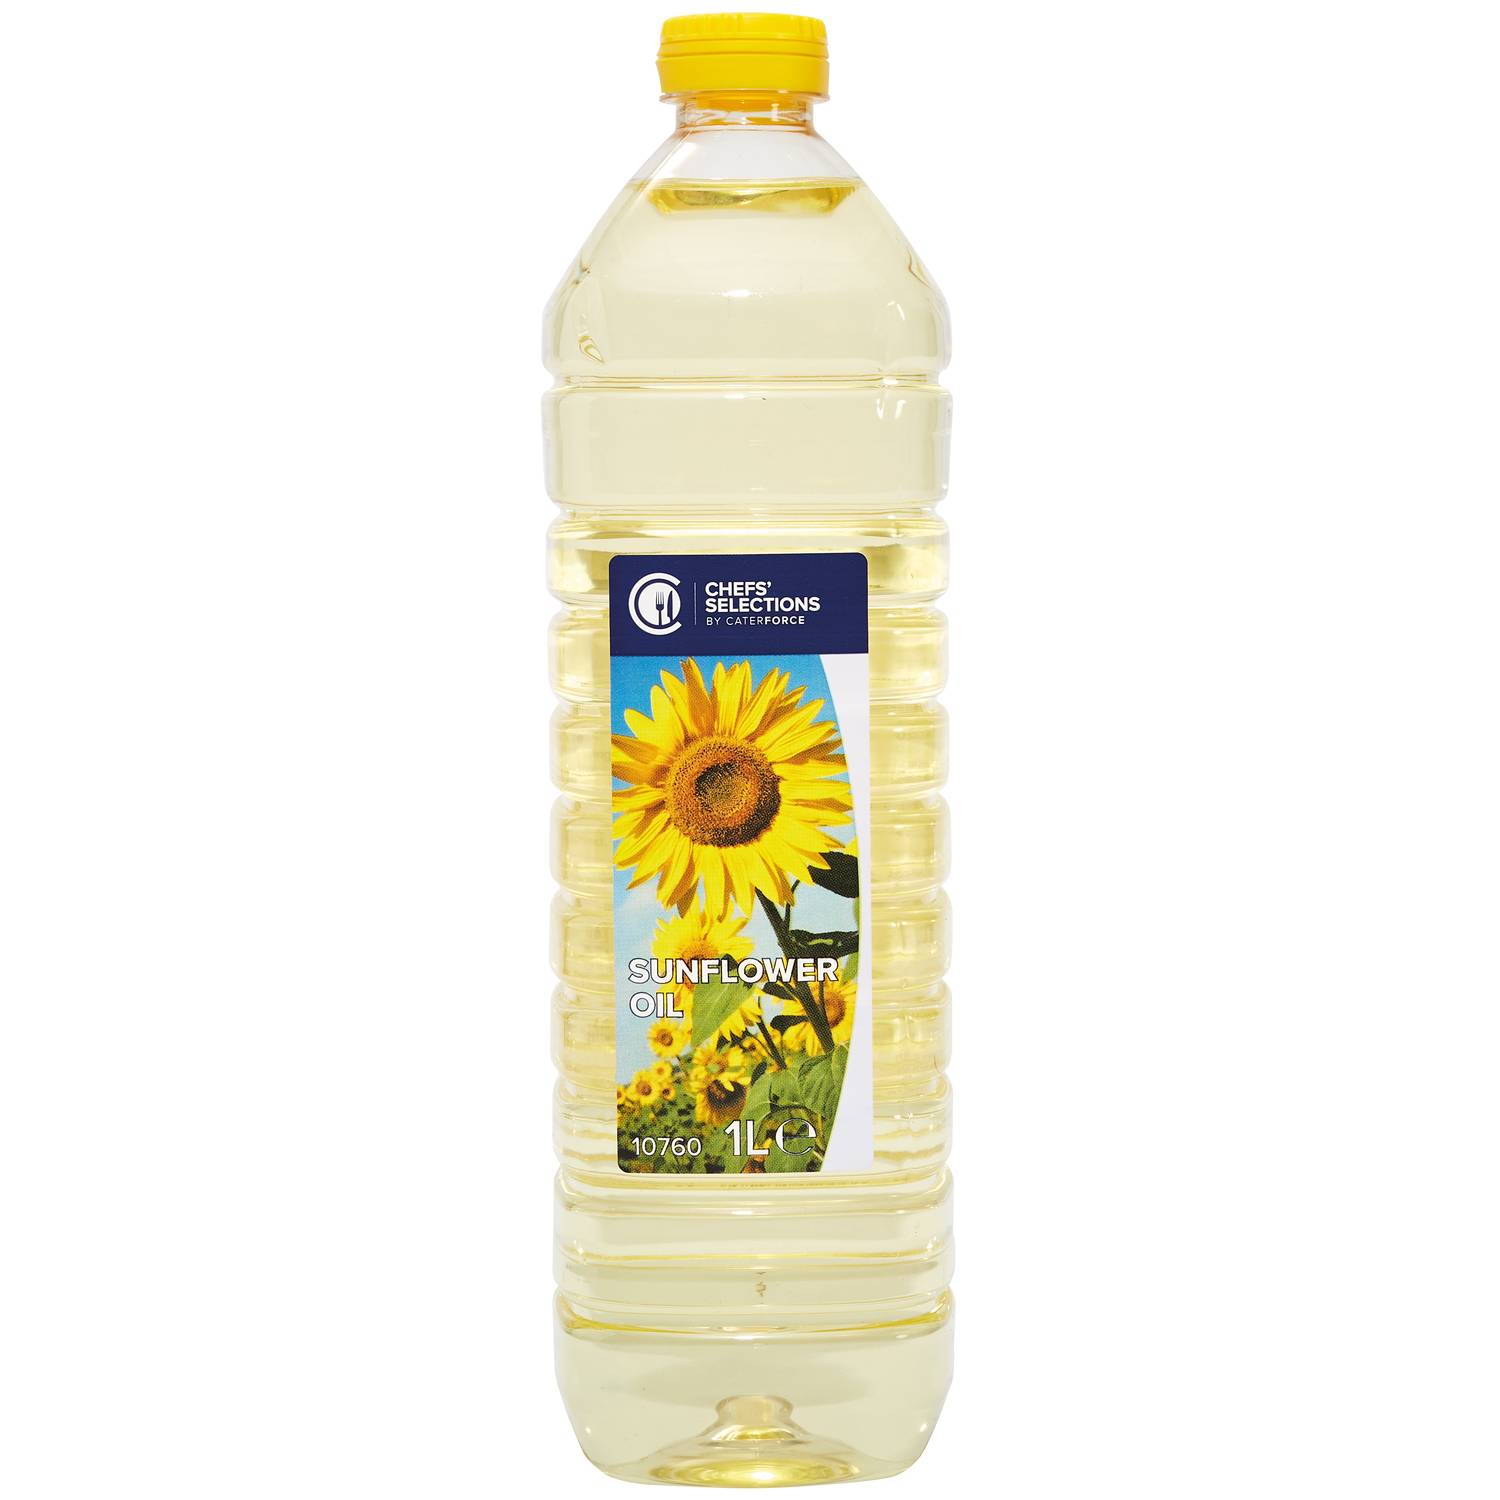 Chefs’ Selections Sunflower Oil (6 x 1L)